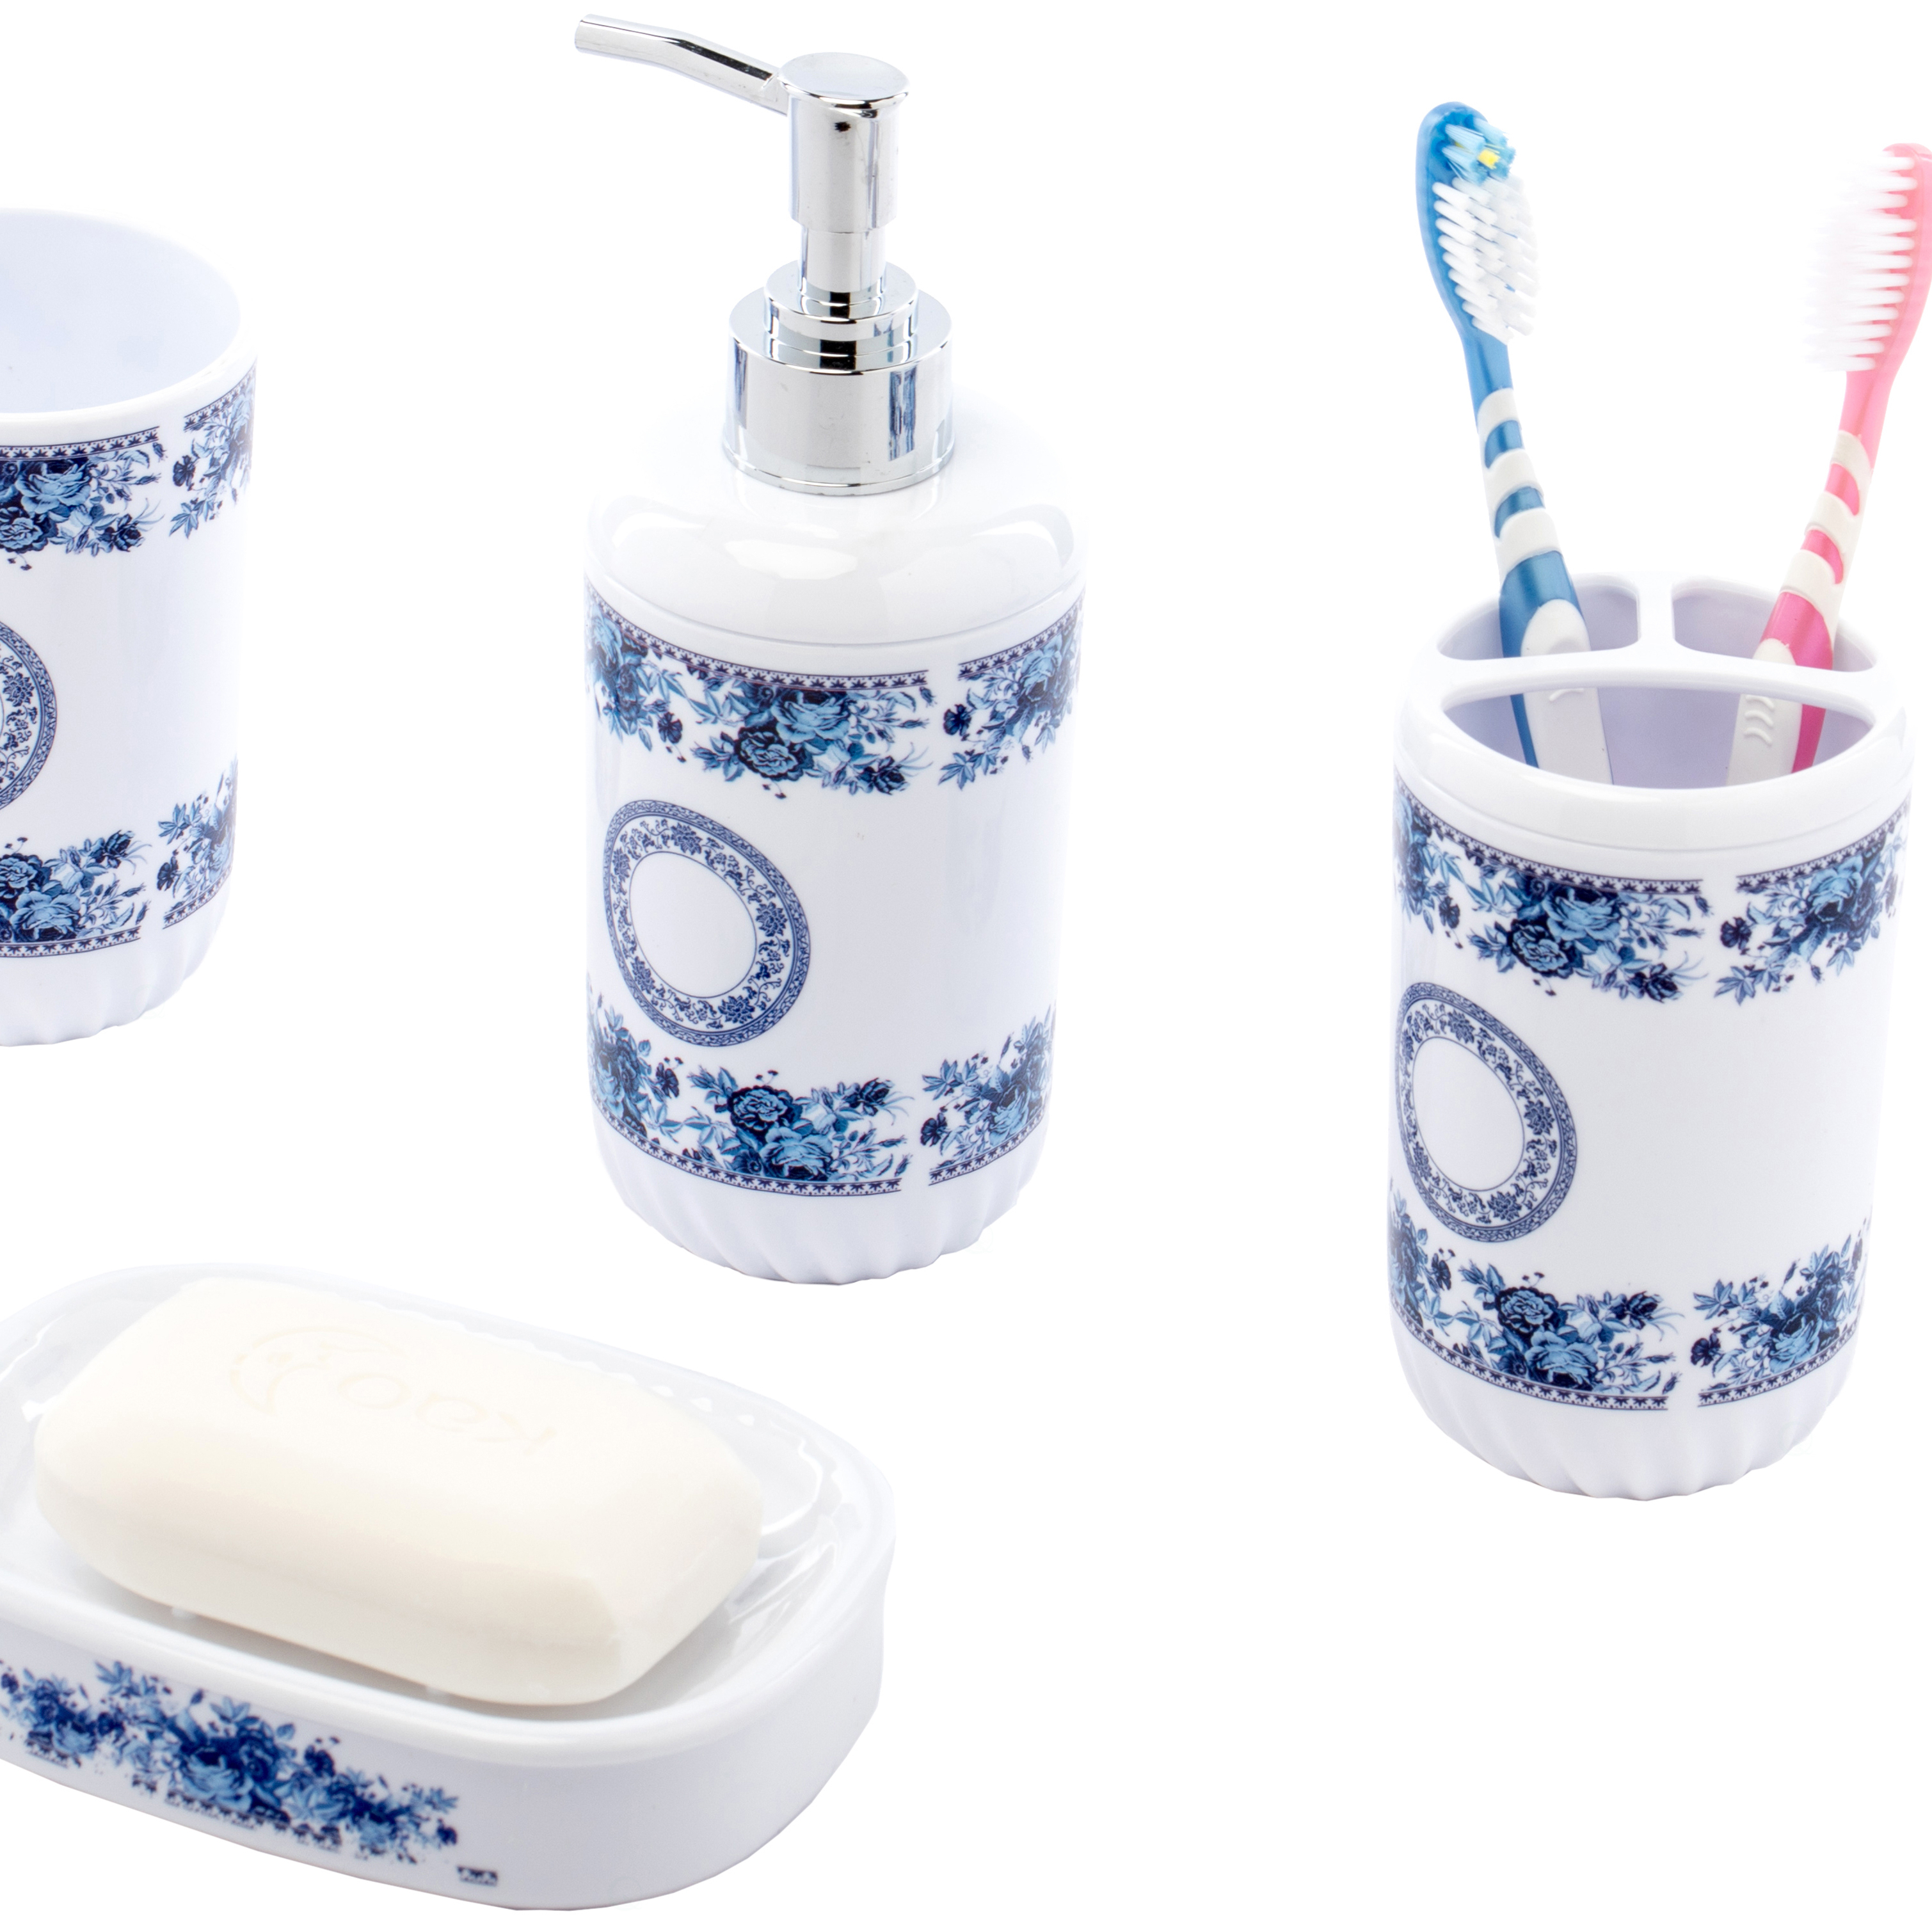 4 Piece Bathroom Accessory Set - Includes Soap Dispenser, Toothbrush Holder, Tumbler, And Soap Dish, White